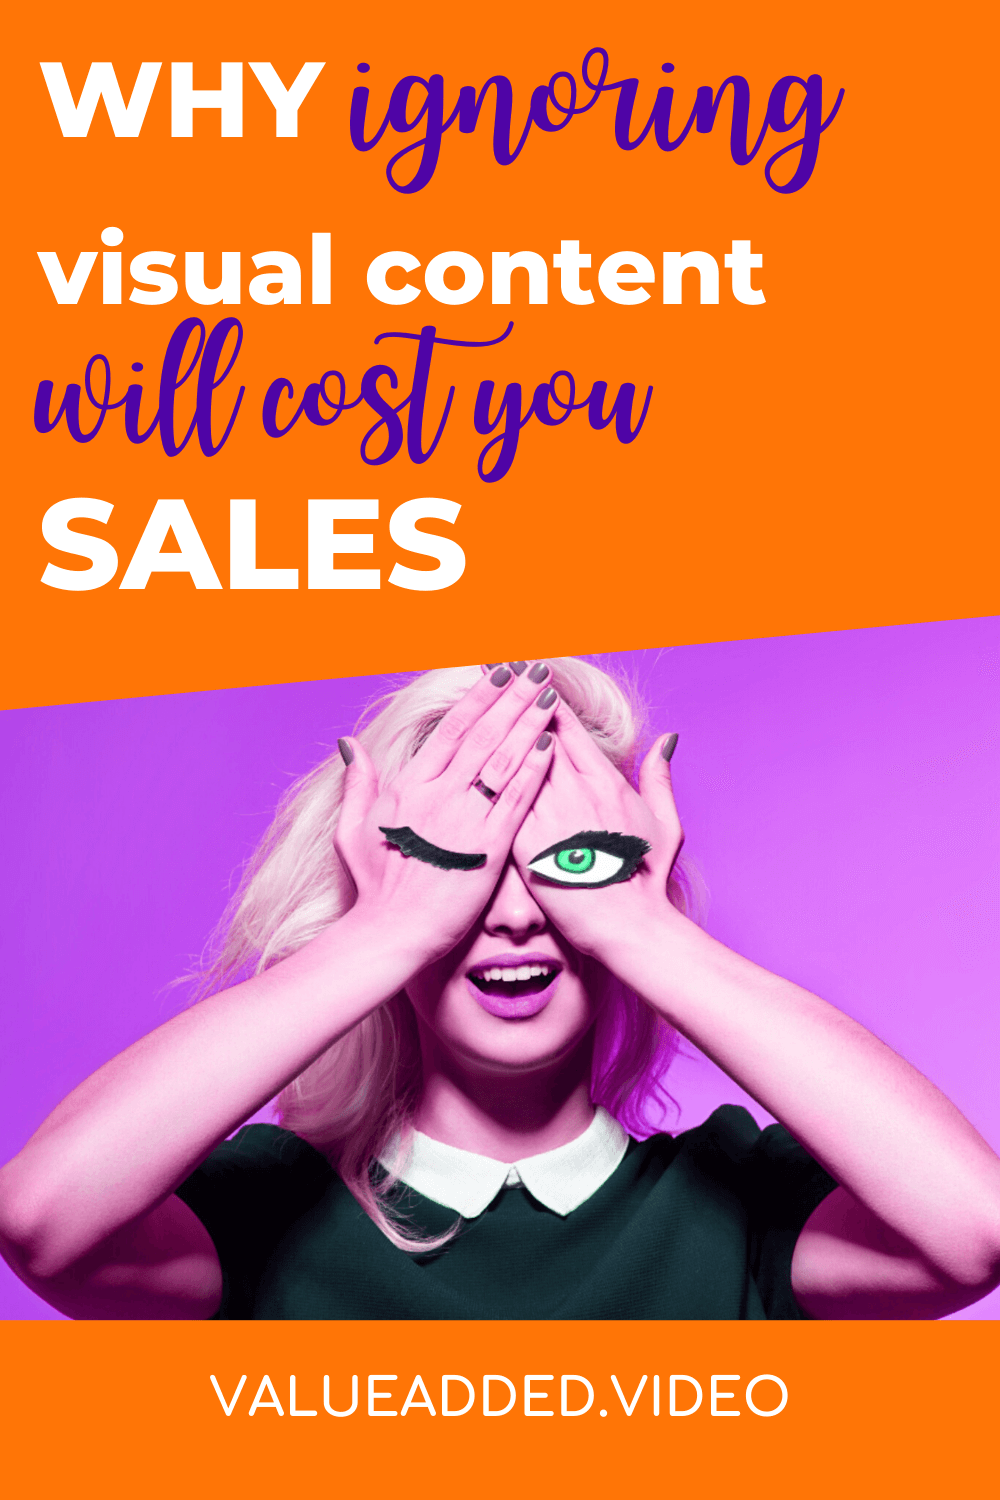 ignoring visual content will cost you sales